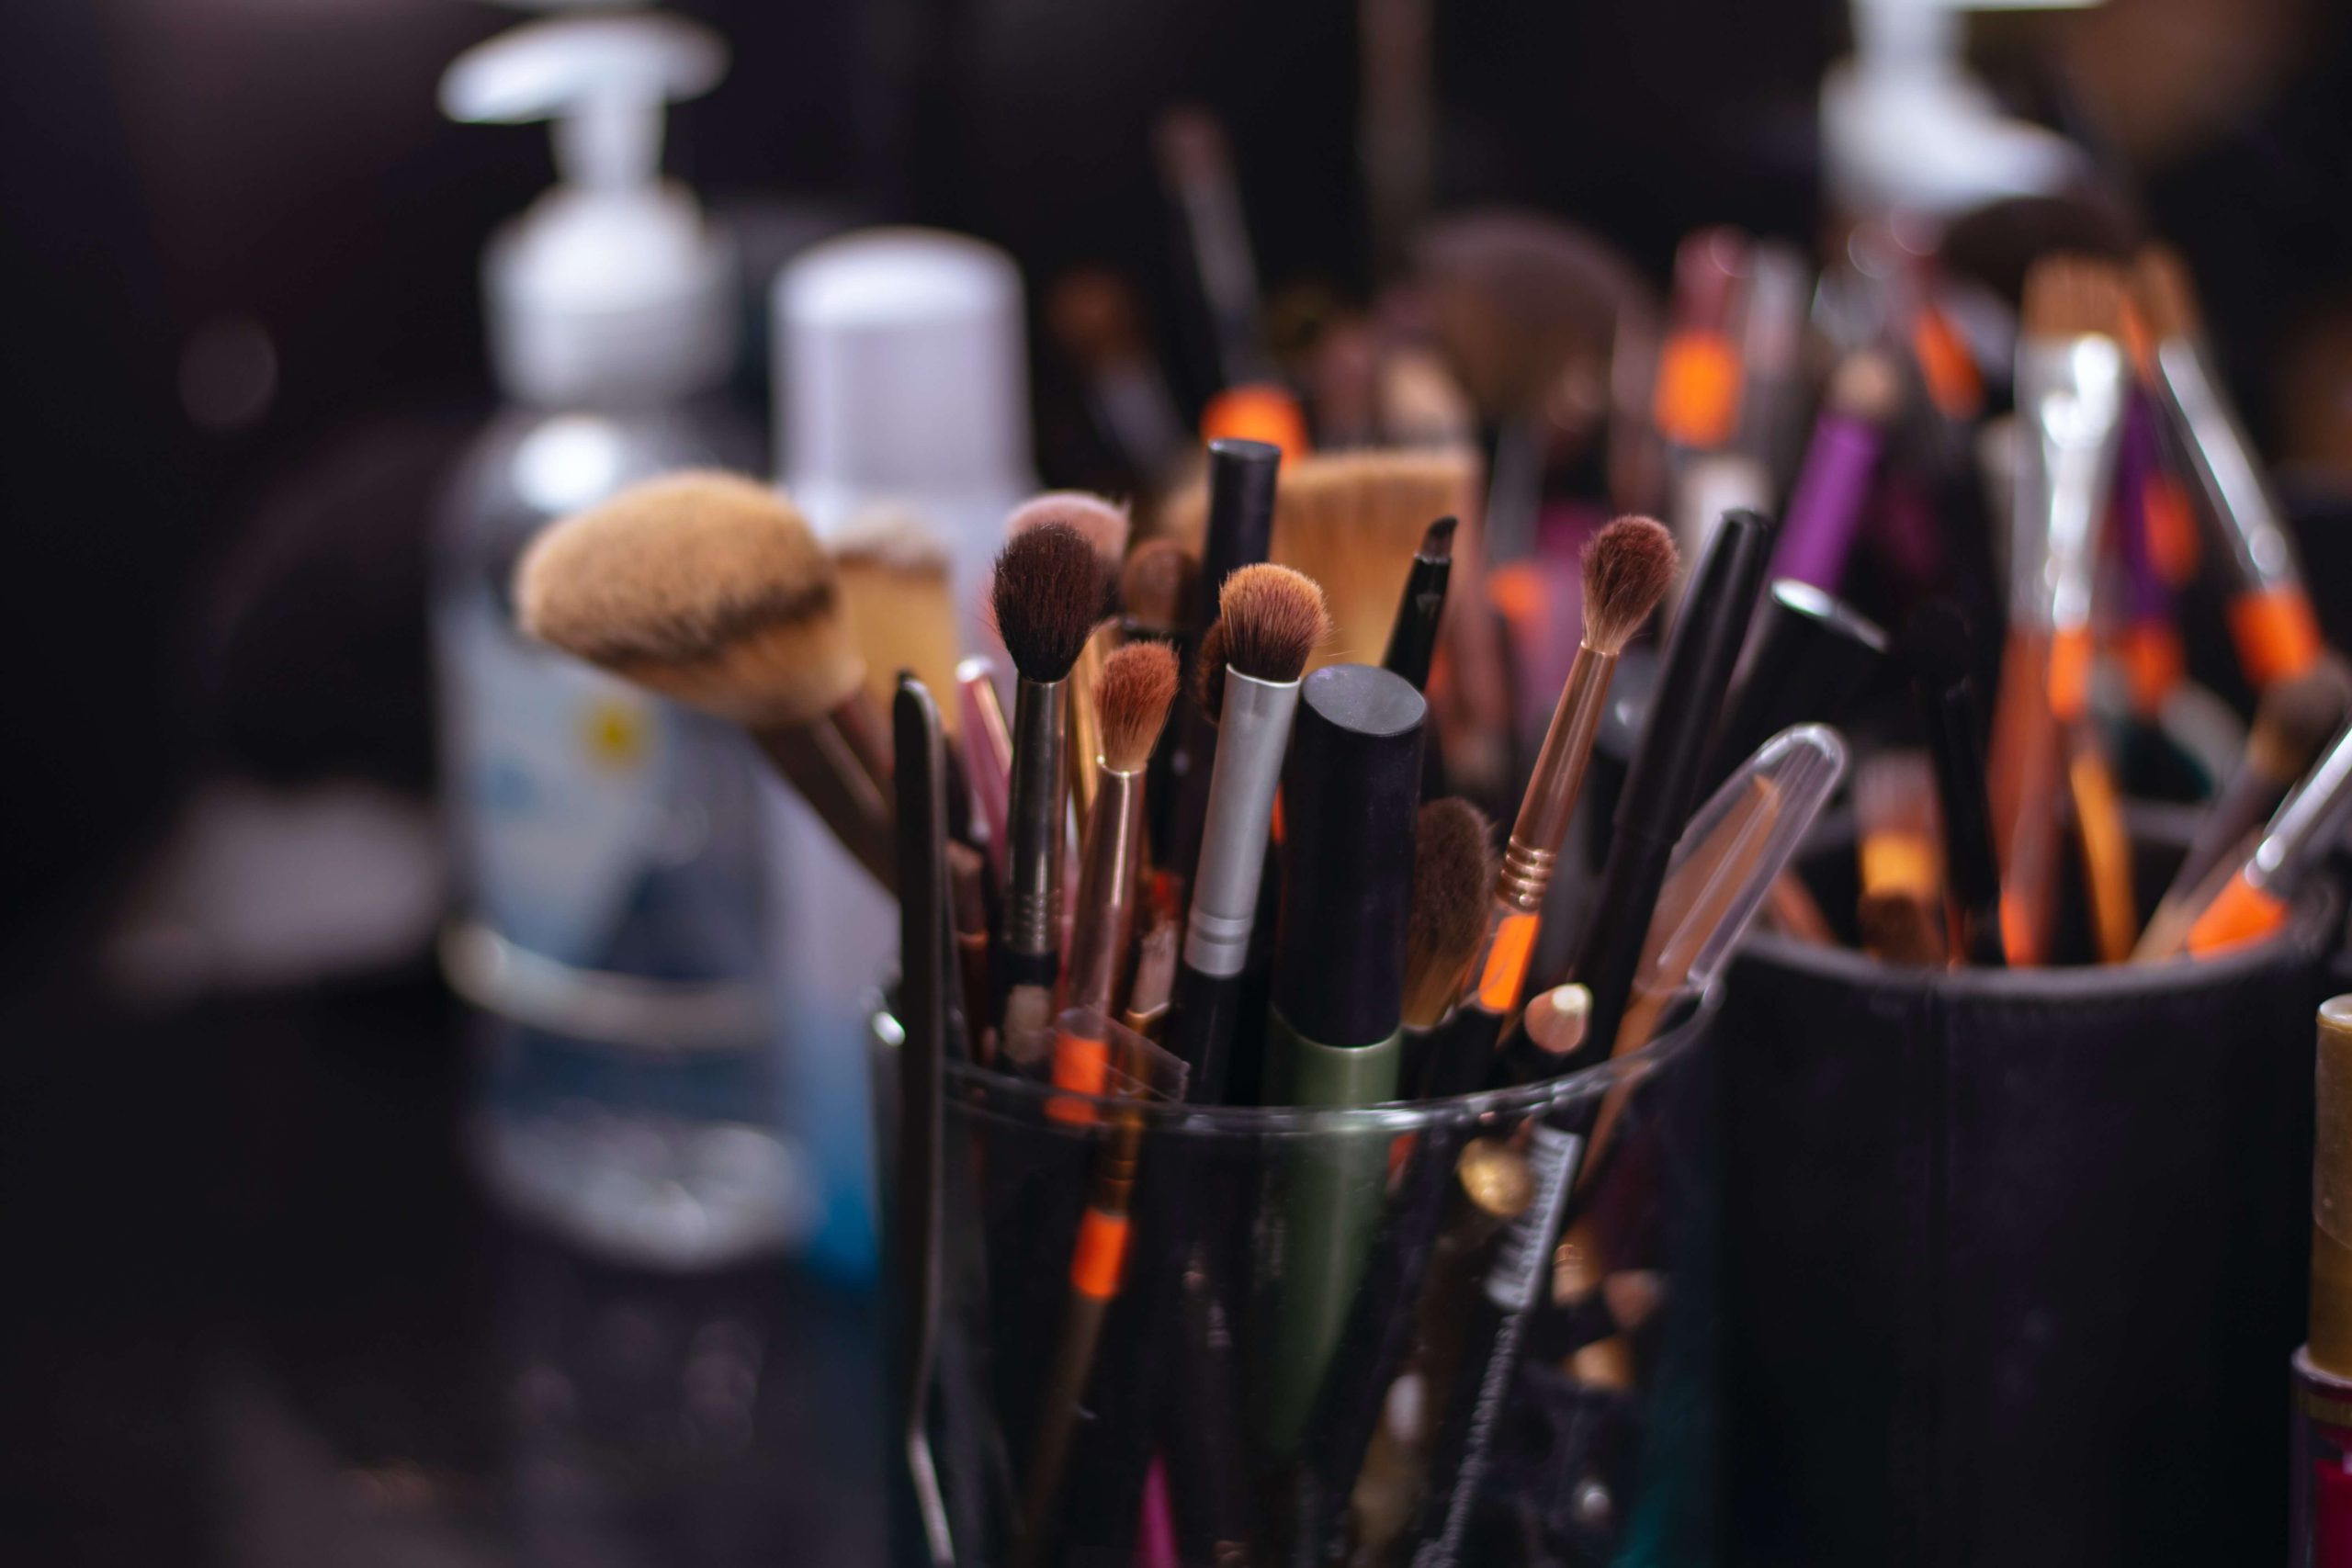 The Do’s And Don’ts For Your Professional Makeup Portfolio (4) makeup portfolio - The Dos And Donts For Your Professional Makeup Portfolio 4 scaled - The Do’s And Don’ts For Your Professional Makeup Portfolio